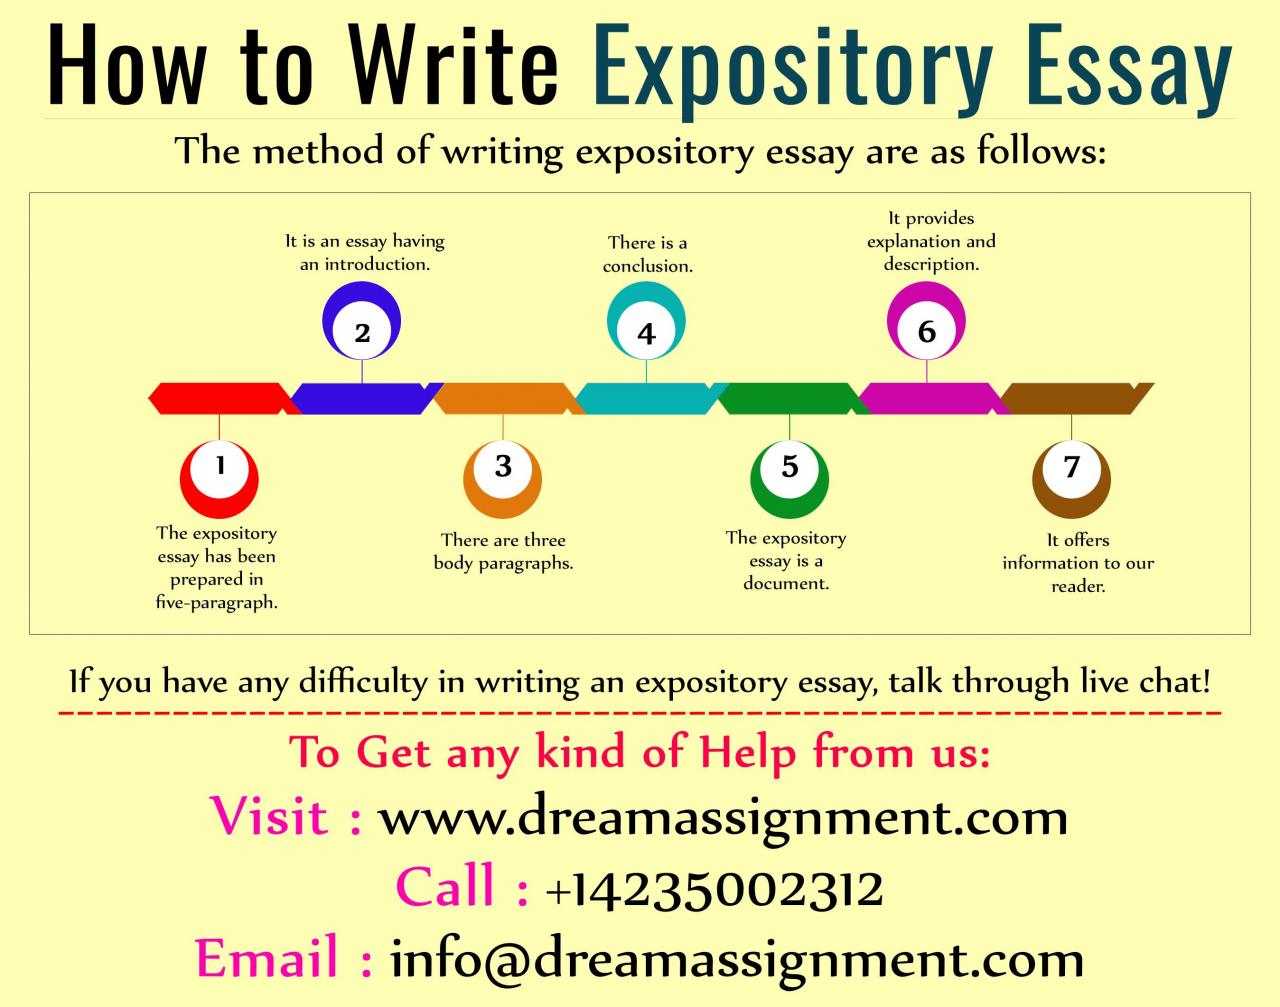 3 main parts of an expository essay